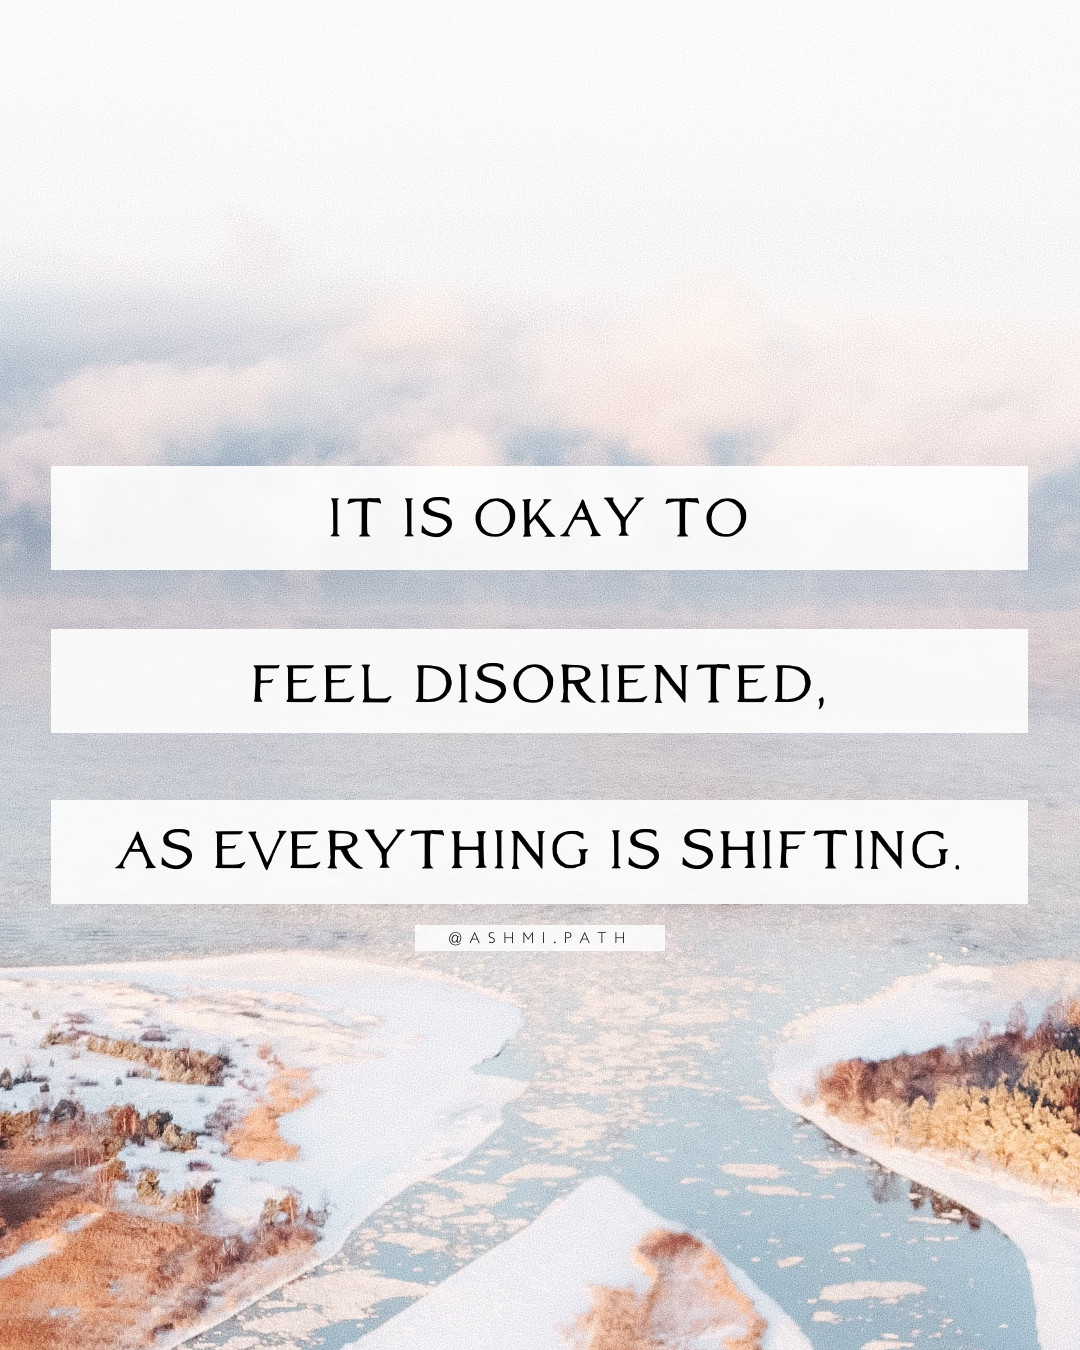 It is Okay to Feel Disoriented, as Everything is Shifting